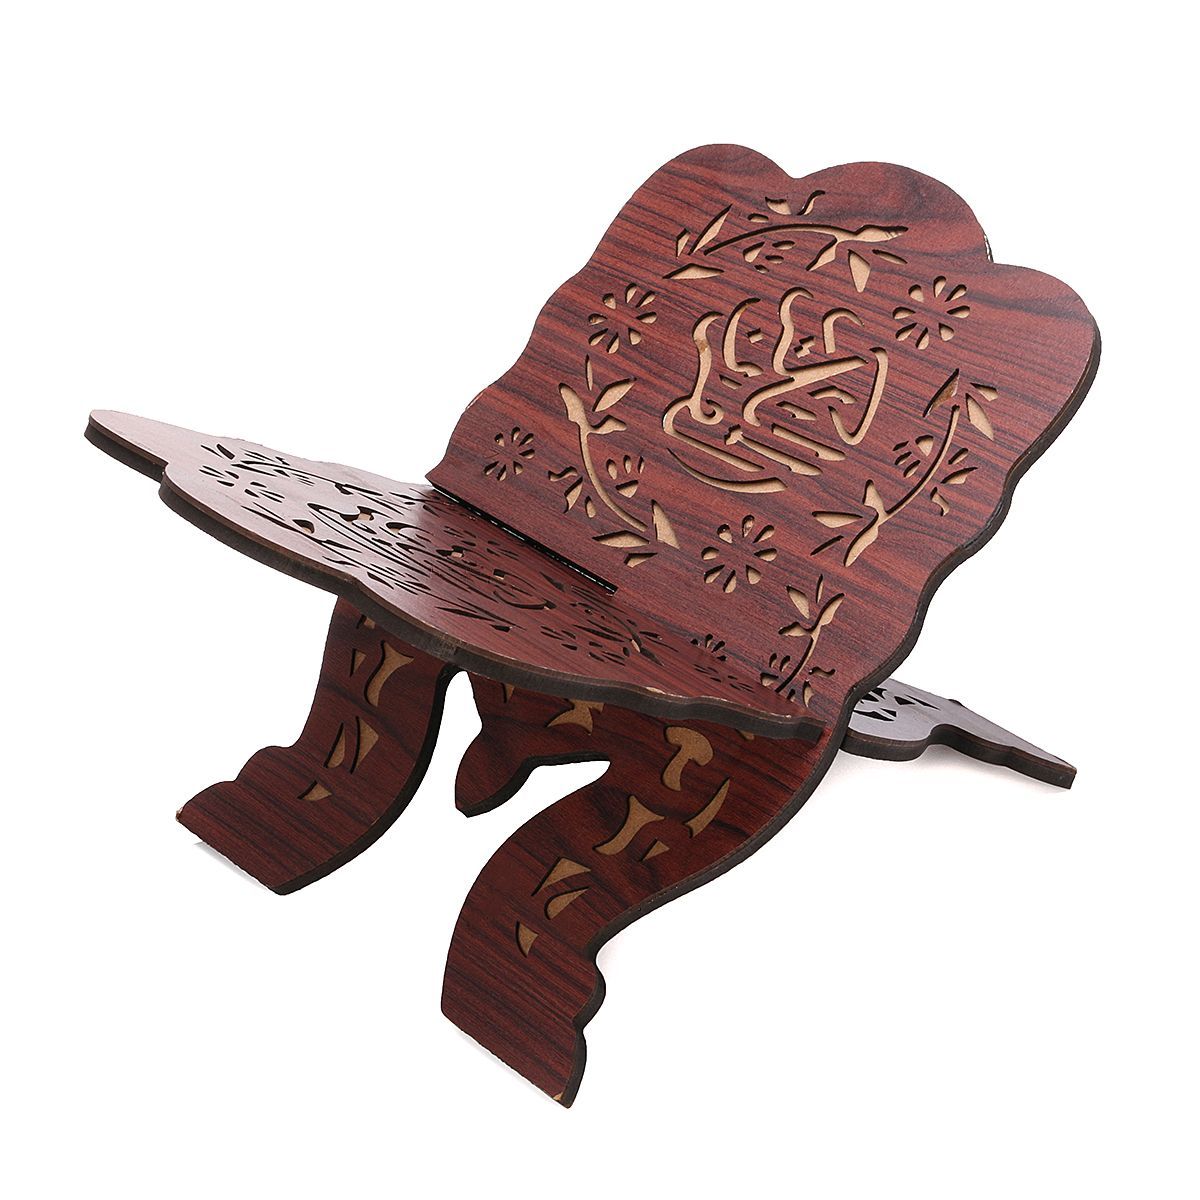 Quran-Book-Holder-Stand-Rihal-Rehal-With-Decorations-Wooden-Small-Bookshelf-1478844